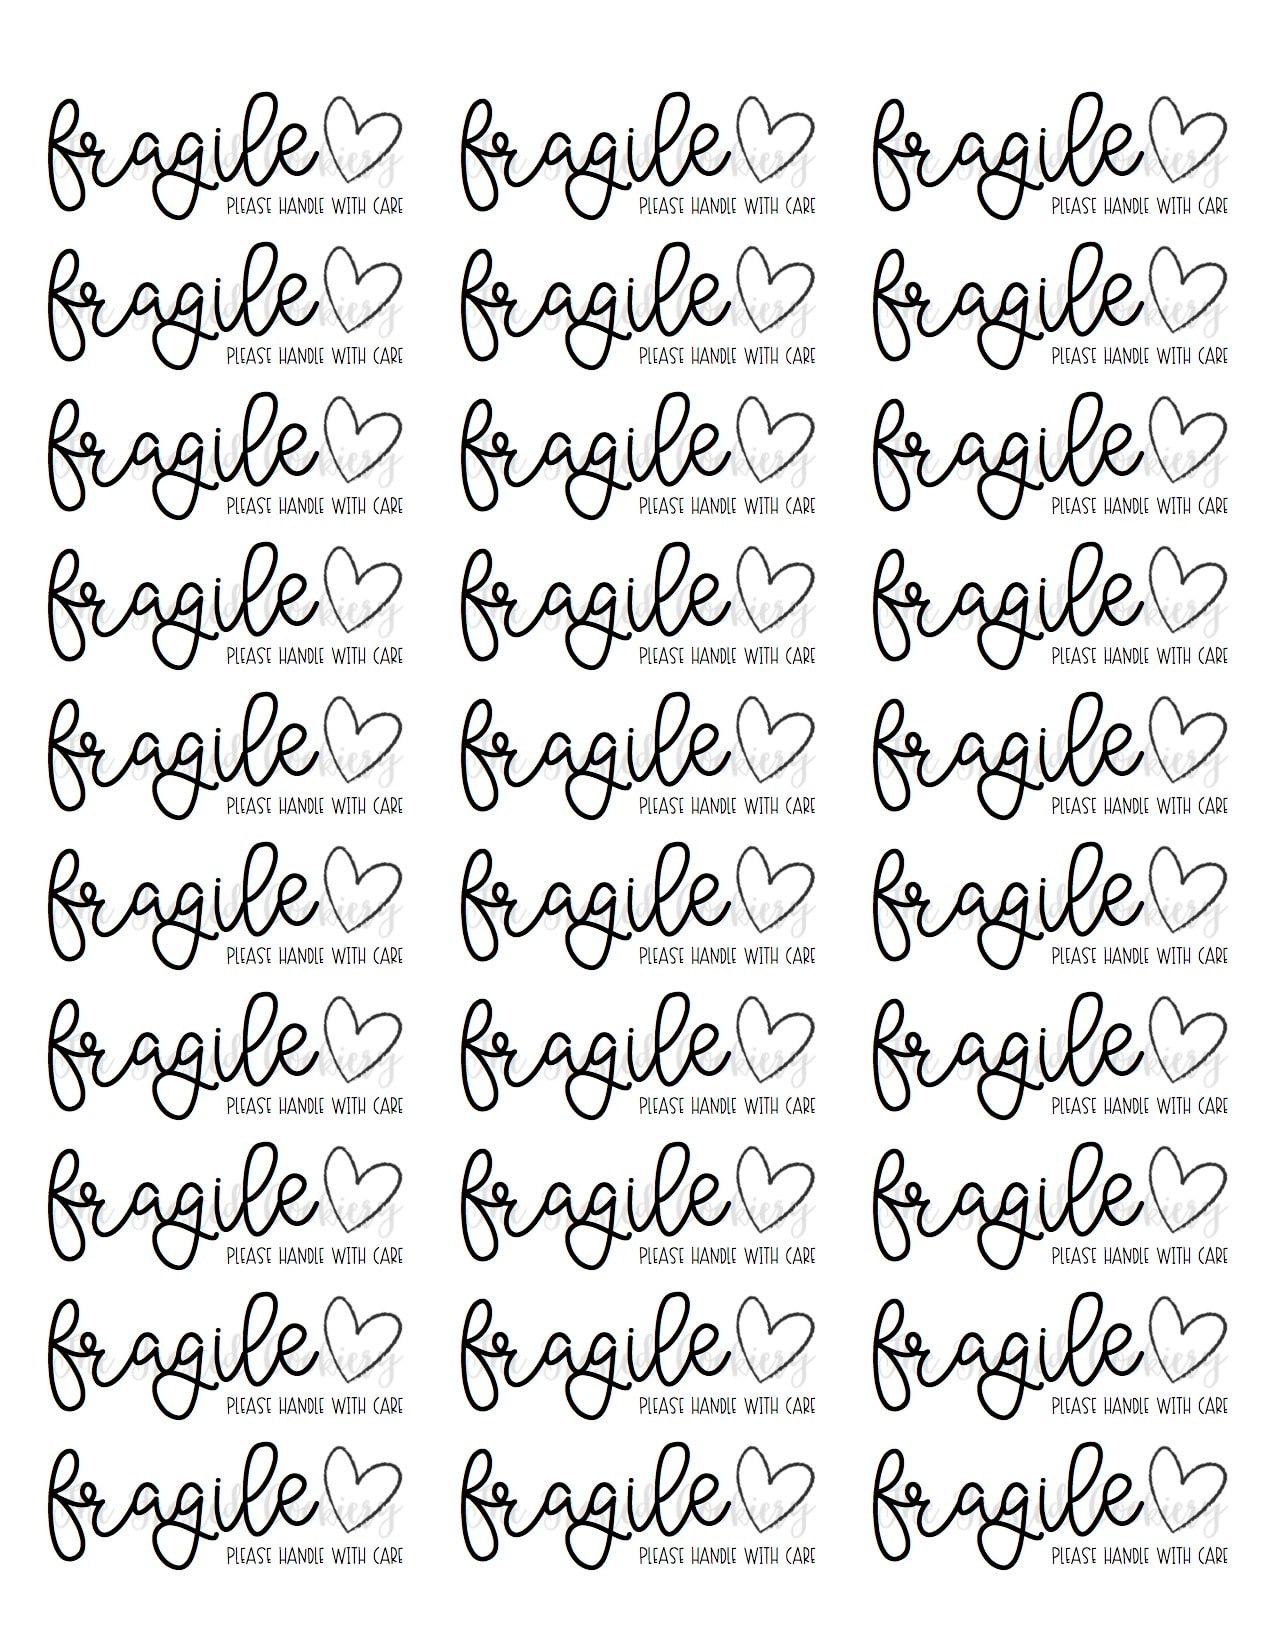 Fragile Label Stickers Use With Avery 5160